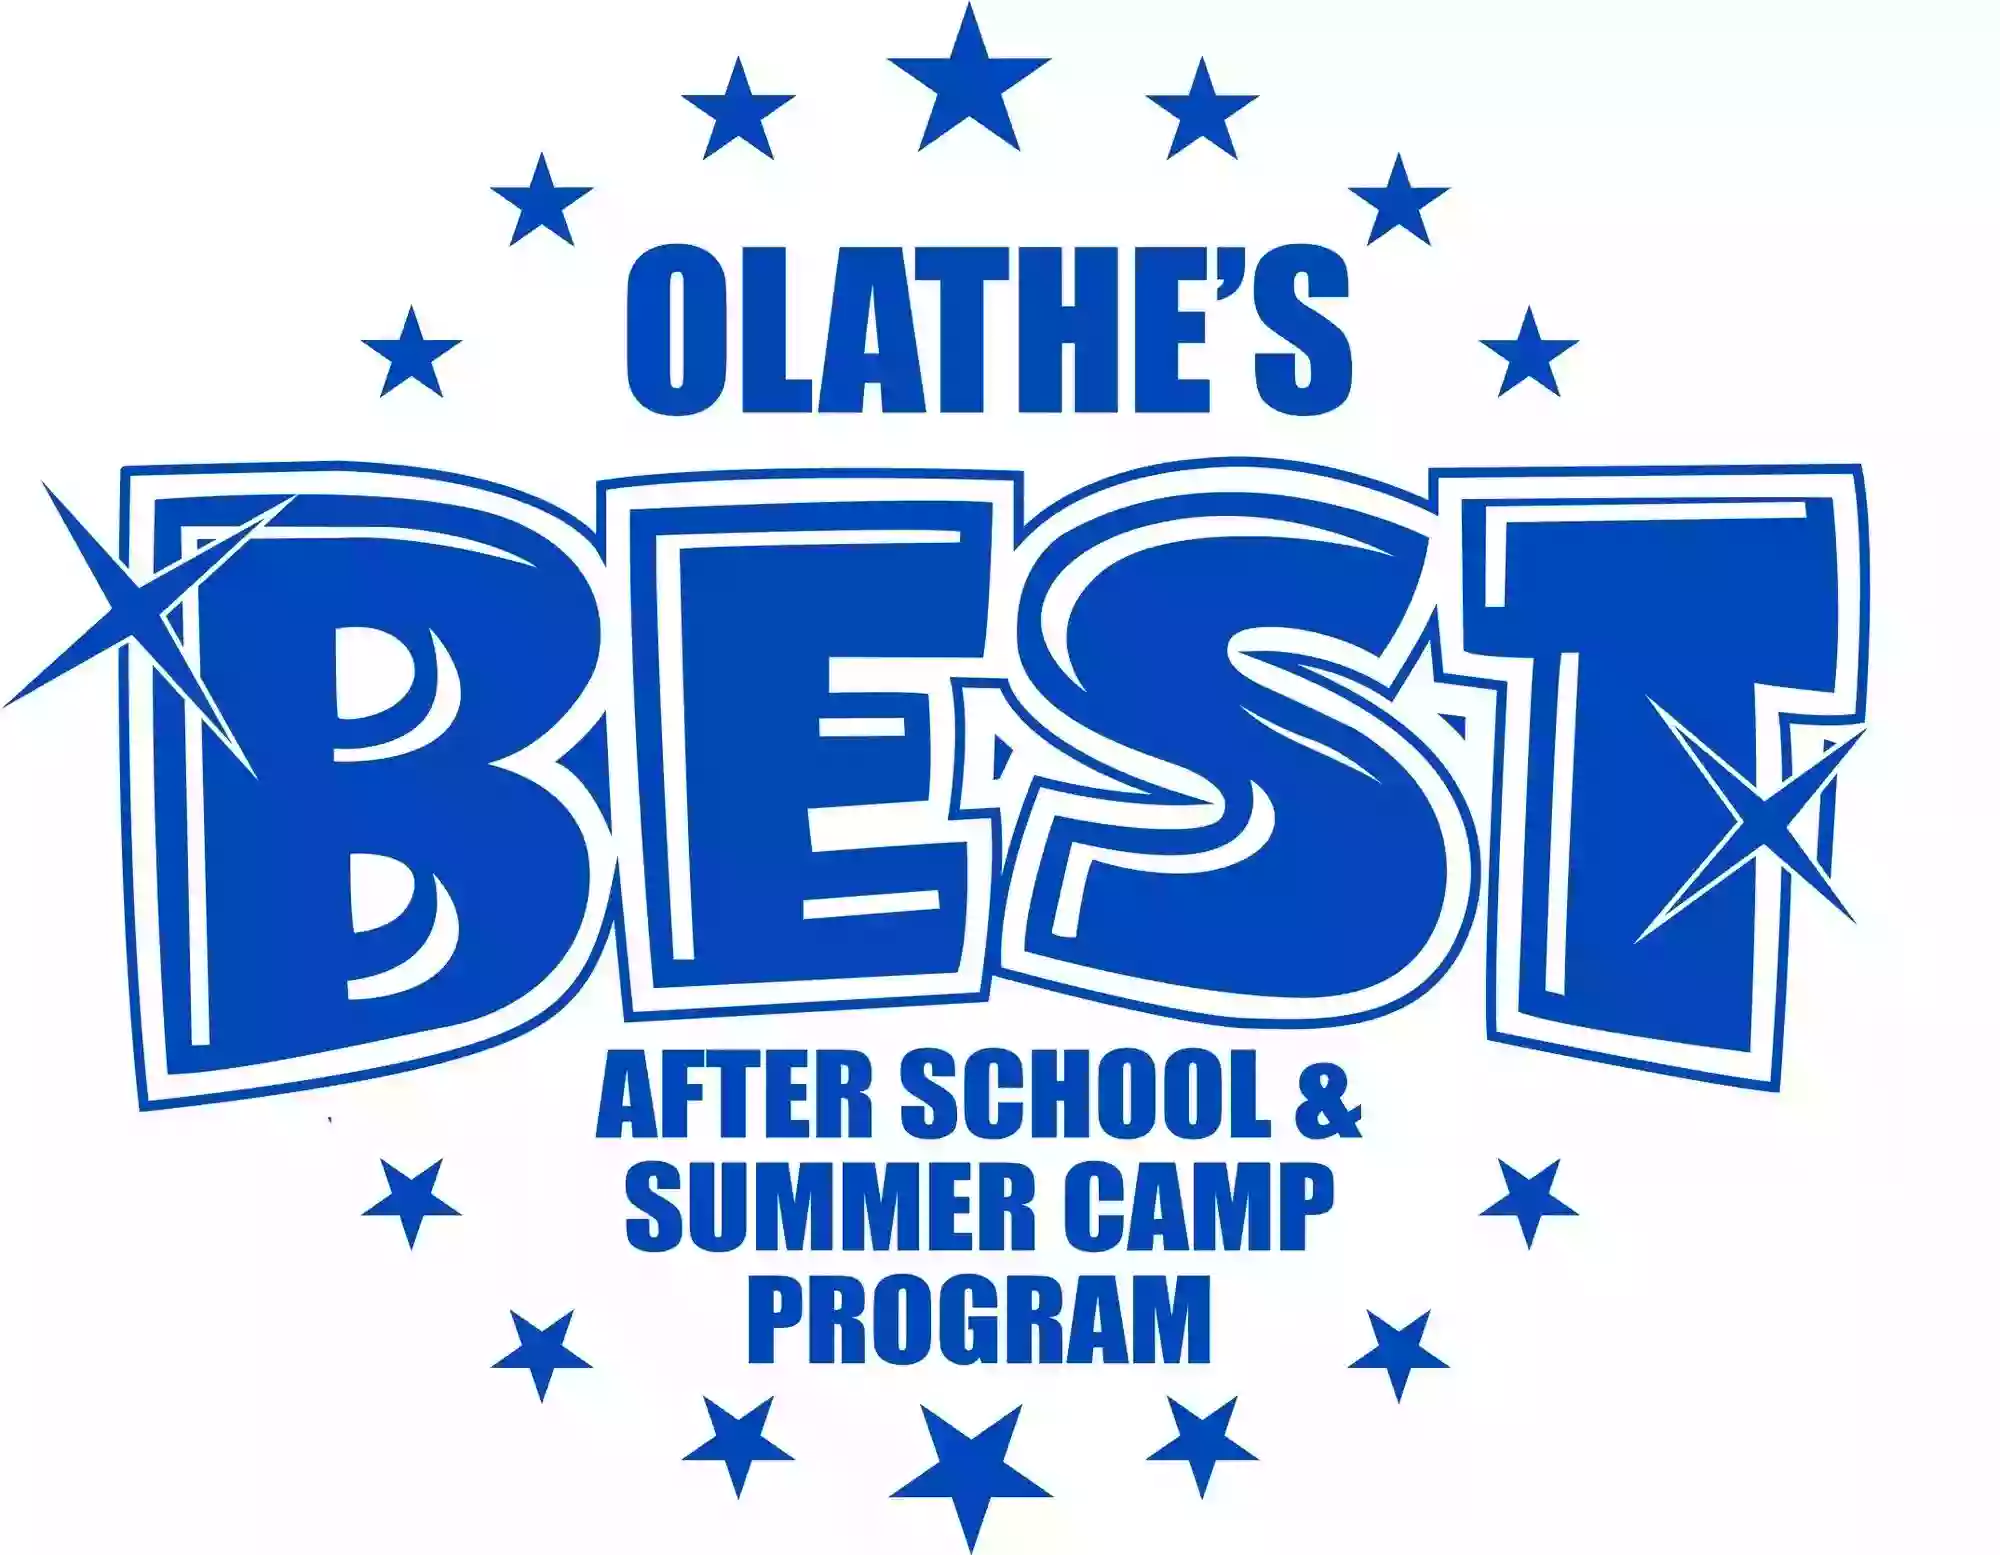 Olathe's Best After School and Summer Camp